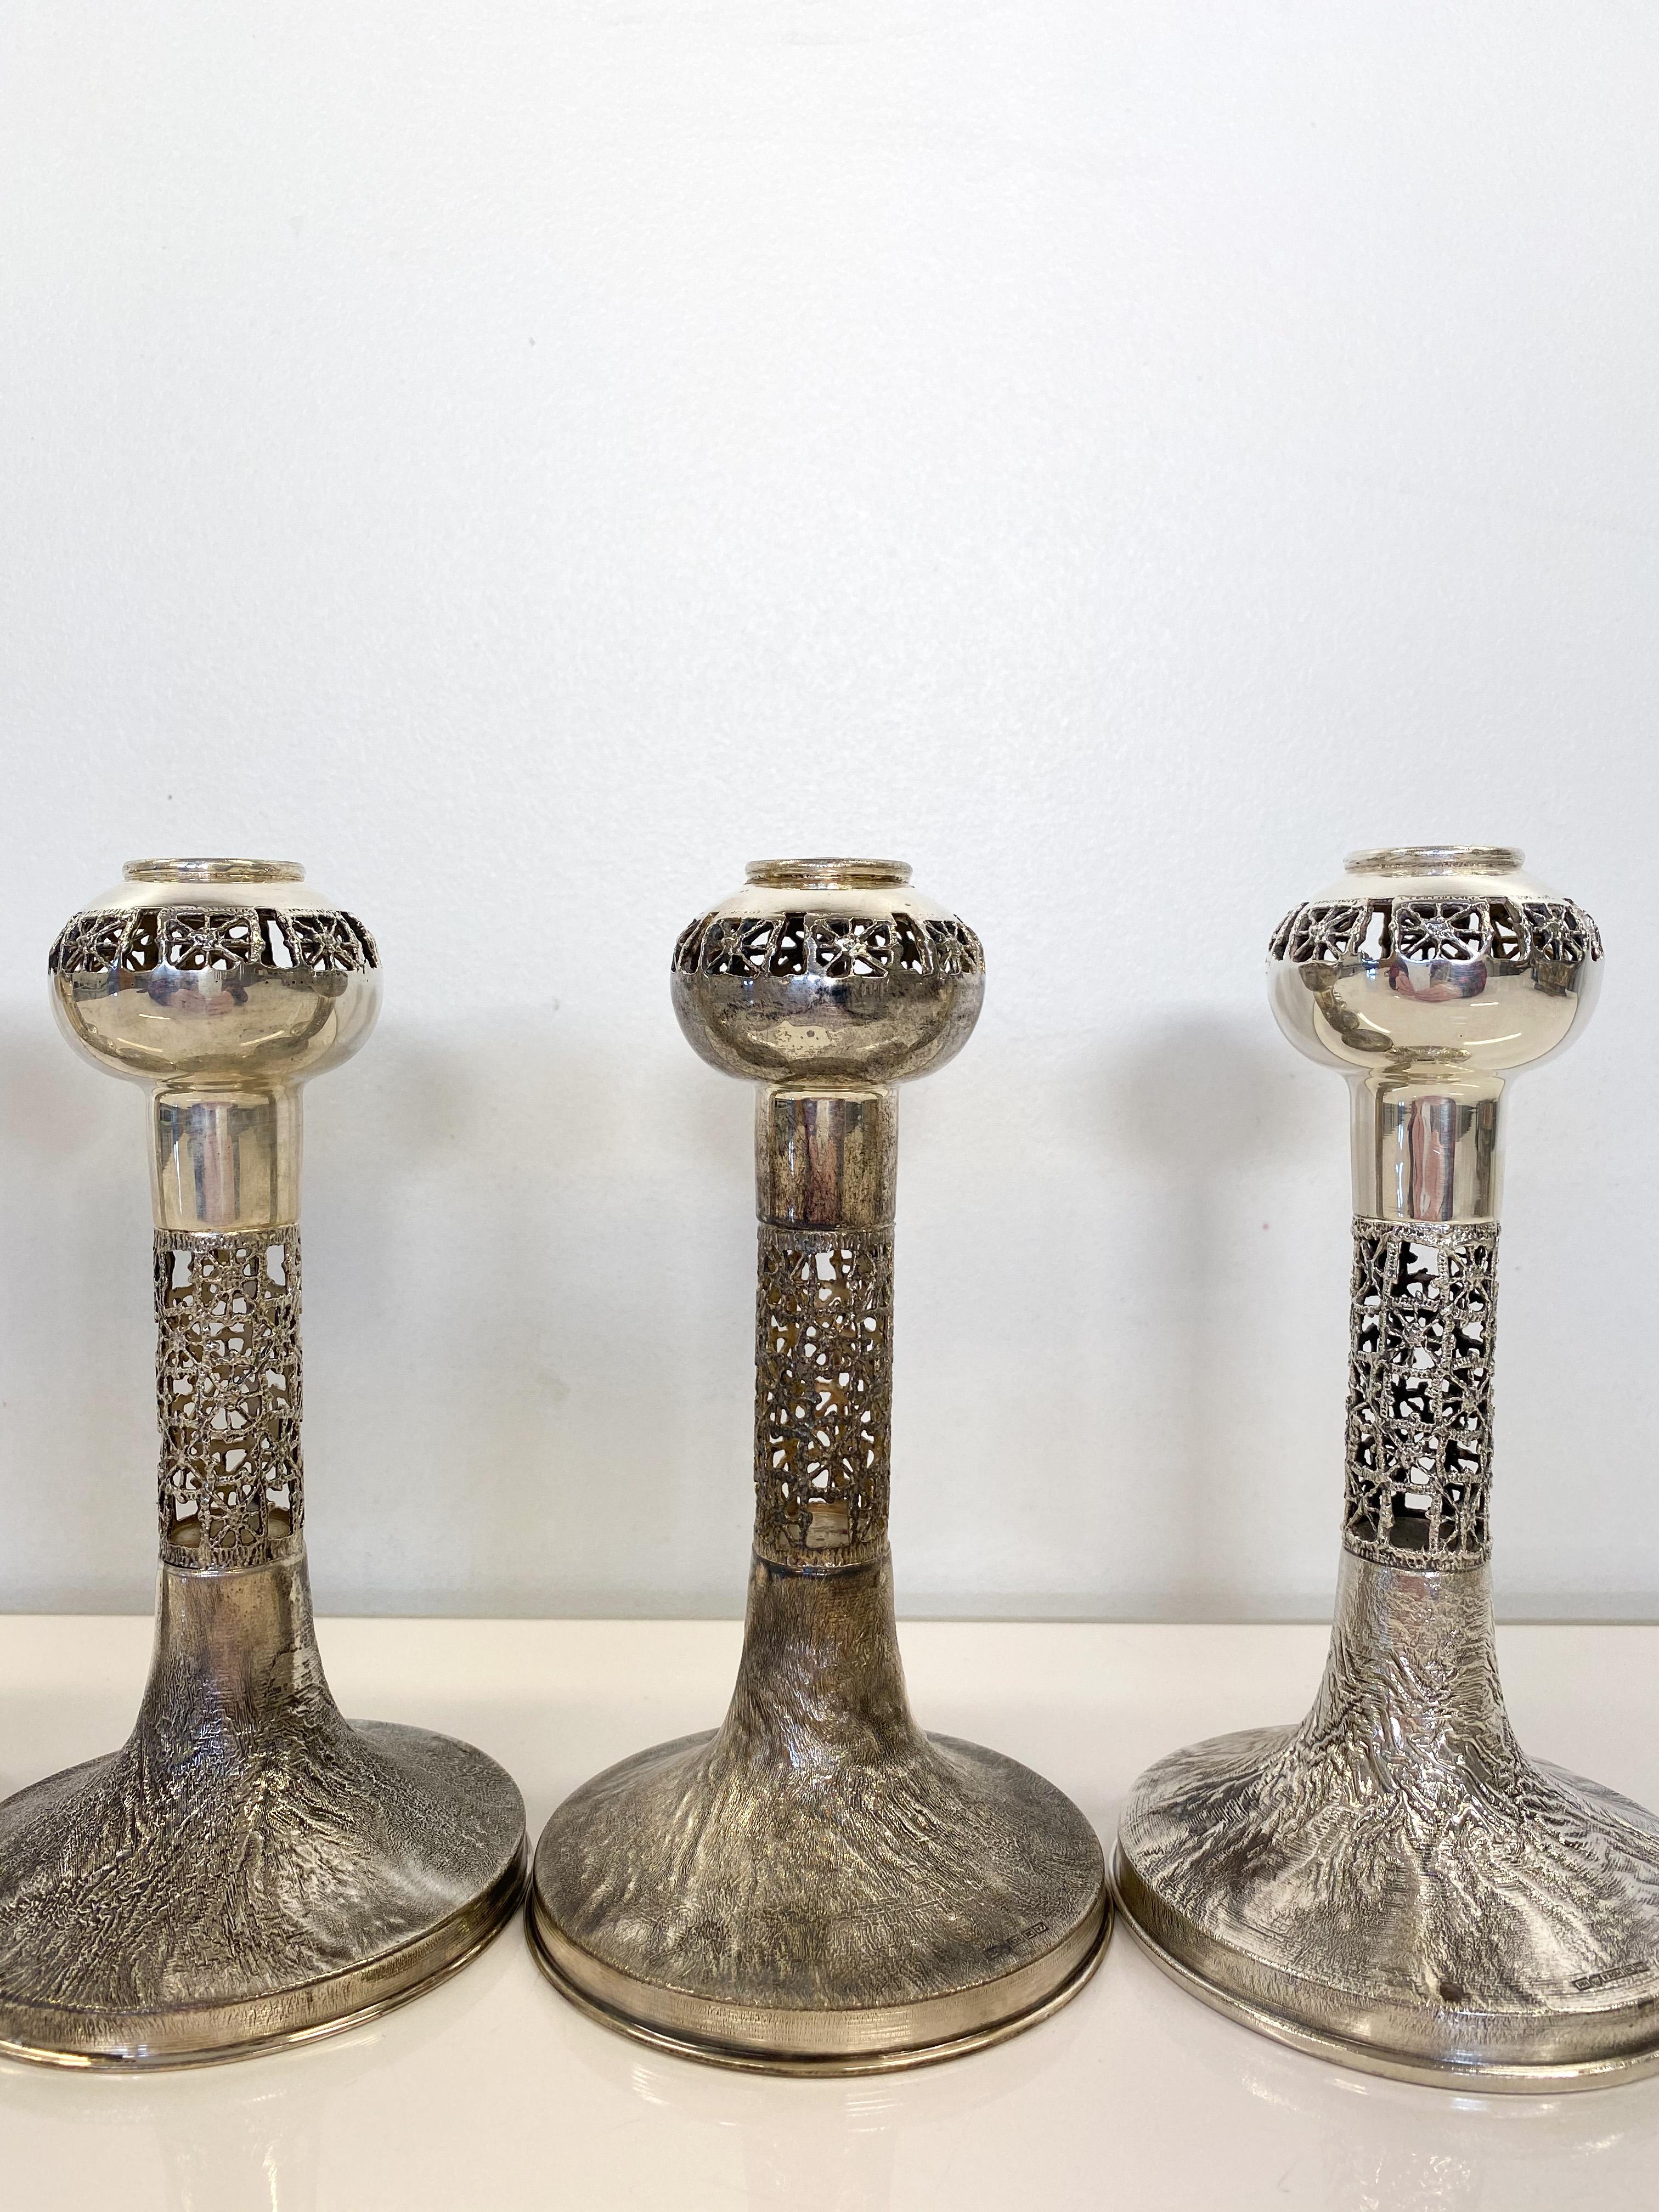 830H Sterling Silver 1972-1975 Finland Pentti Sarpaneva Six Lace Candleholders
Six candleholders made 1972, 2ps 1973, 1974, 1975 and 1976
Height 16cm, Diameter 9cm
Silver 830H
Minor wear, engravings in 3 of them at the bottom. See picture.

Pentti